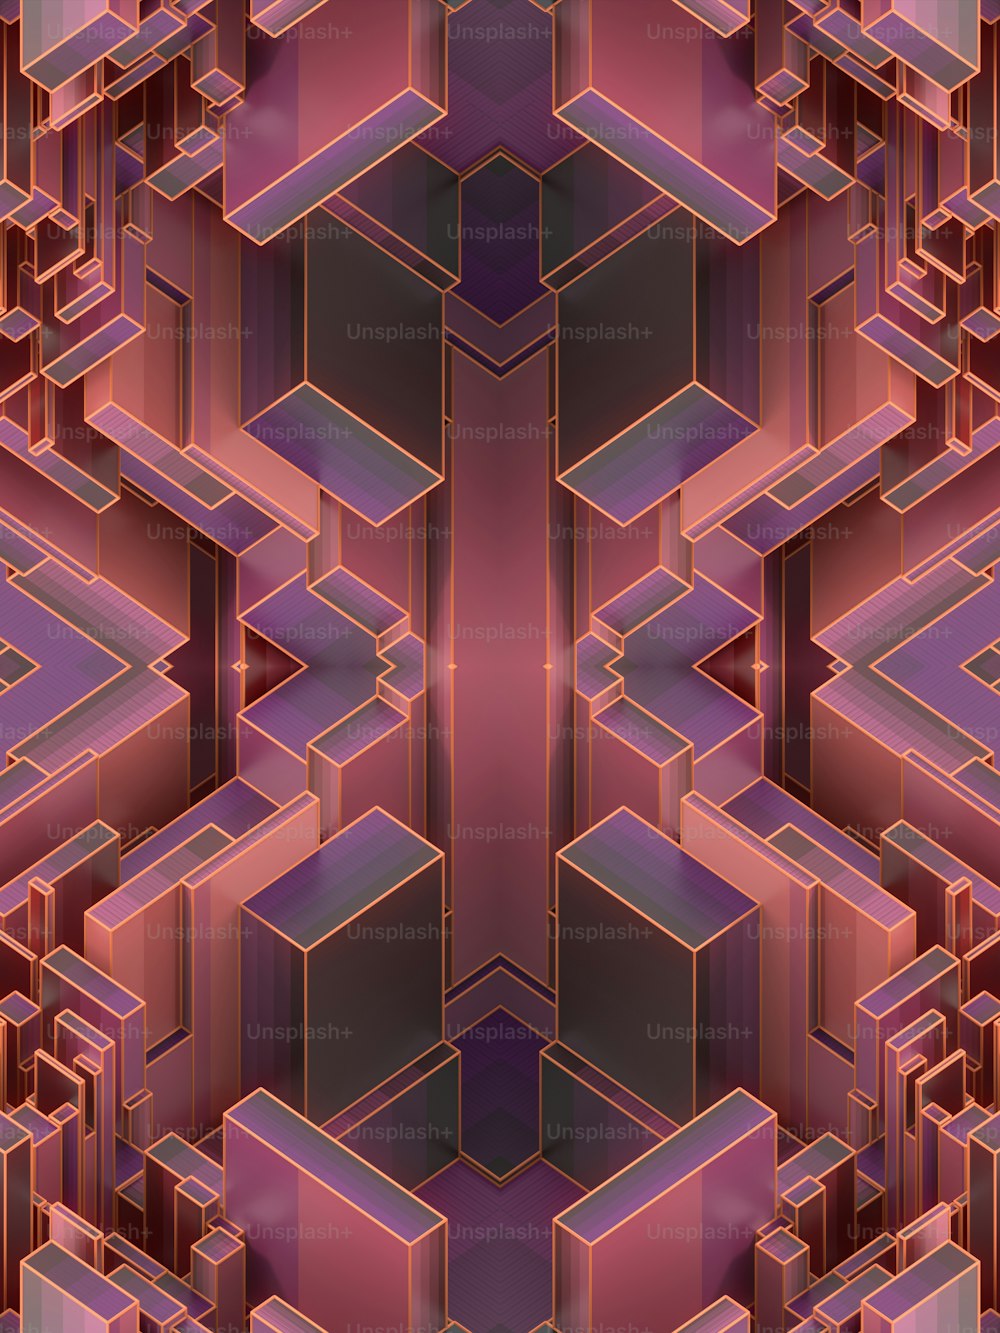 Fantasy abstract digital illustration with 3d rendering impossible architecture shapes. Surreal kaleidoscopic design element. Geometrical multi colored composition